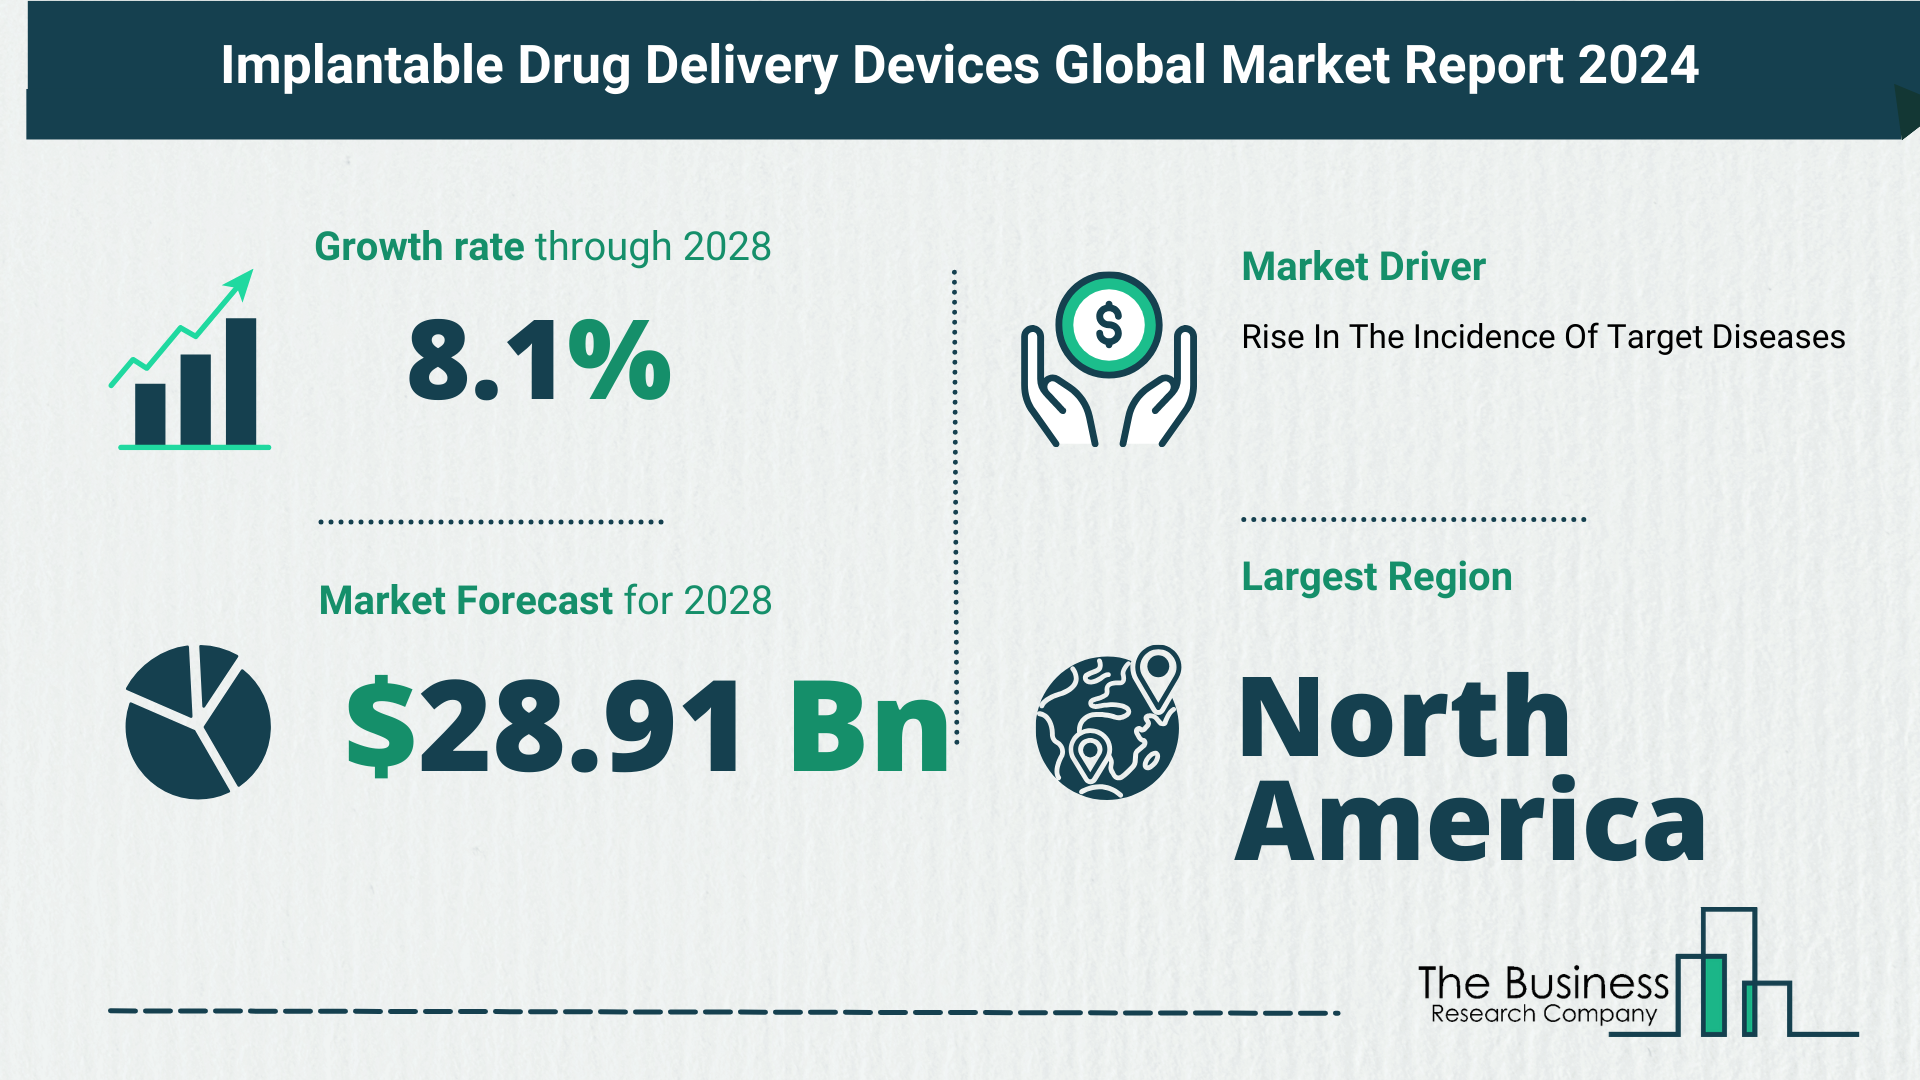 Global Implantable Drug Delivery Devices Market Analysis 2024: Size, Share, And Key Trends